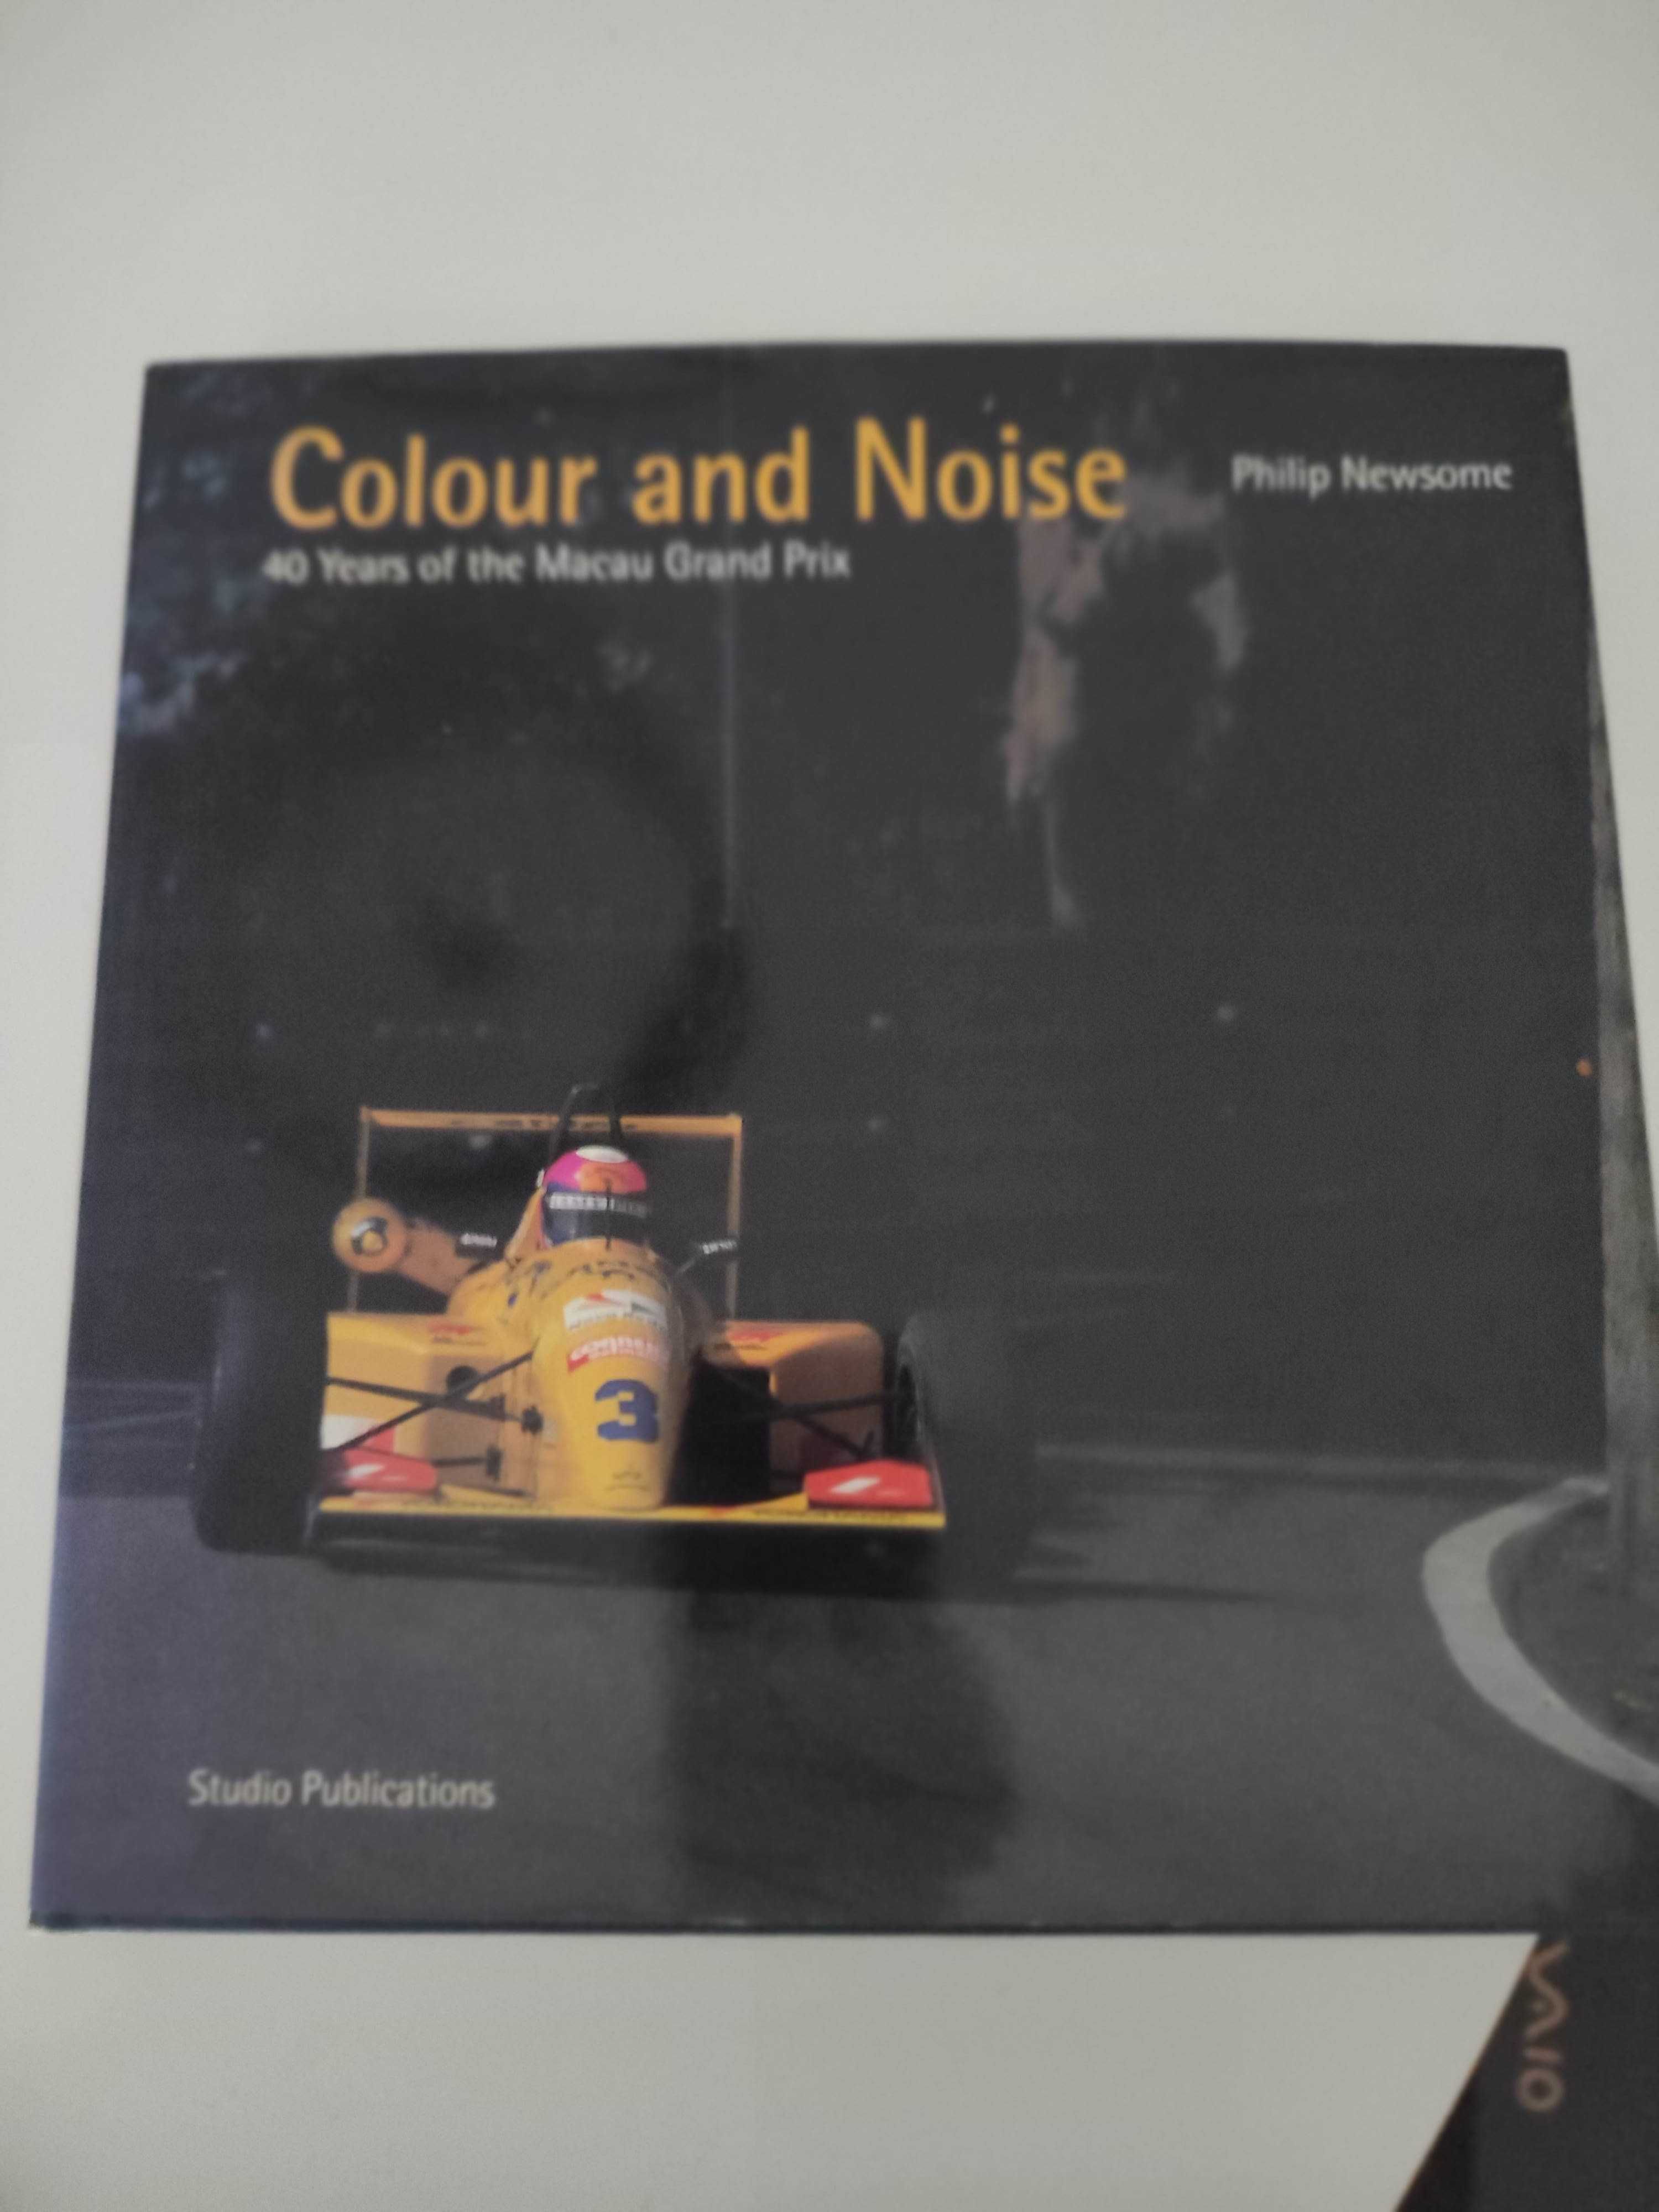 Livro Colour and Noise 40 Years of the Macau Grand Prix